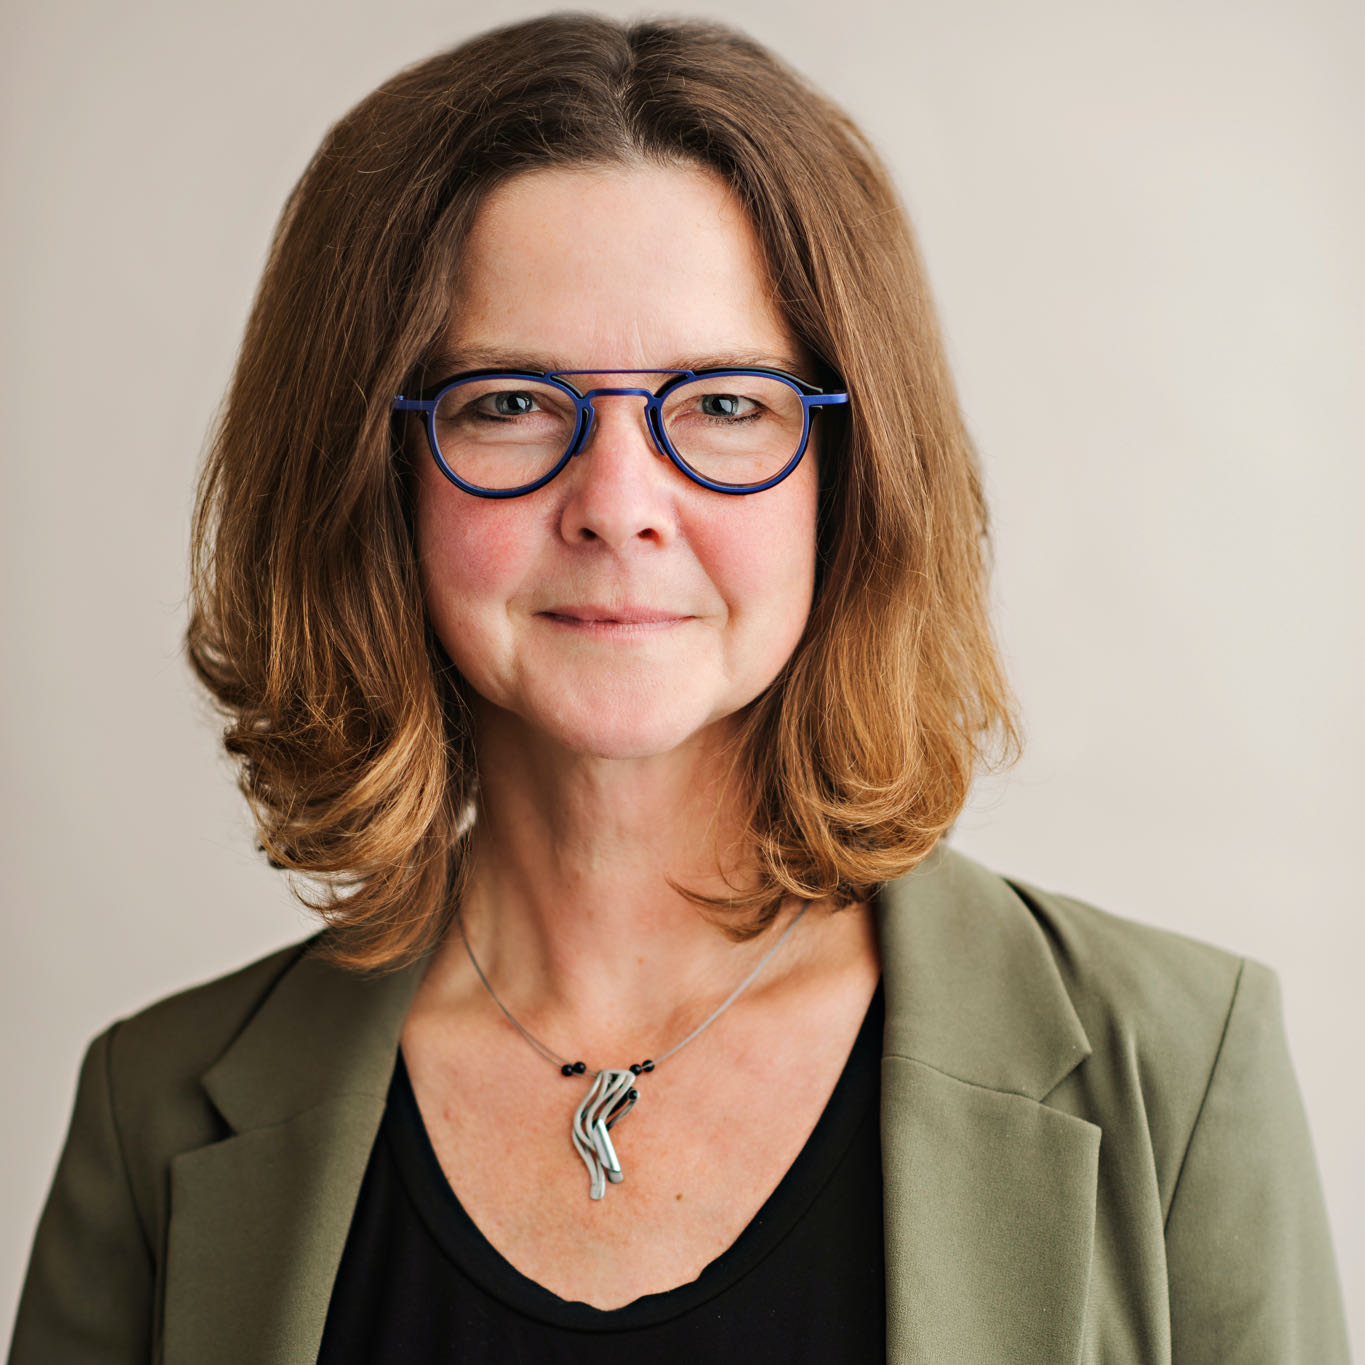 Image - Laurier appoints Heidi Northwood as senior executive officer: global strategy